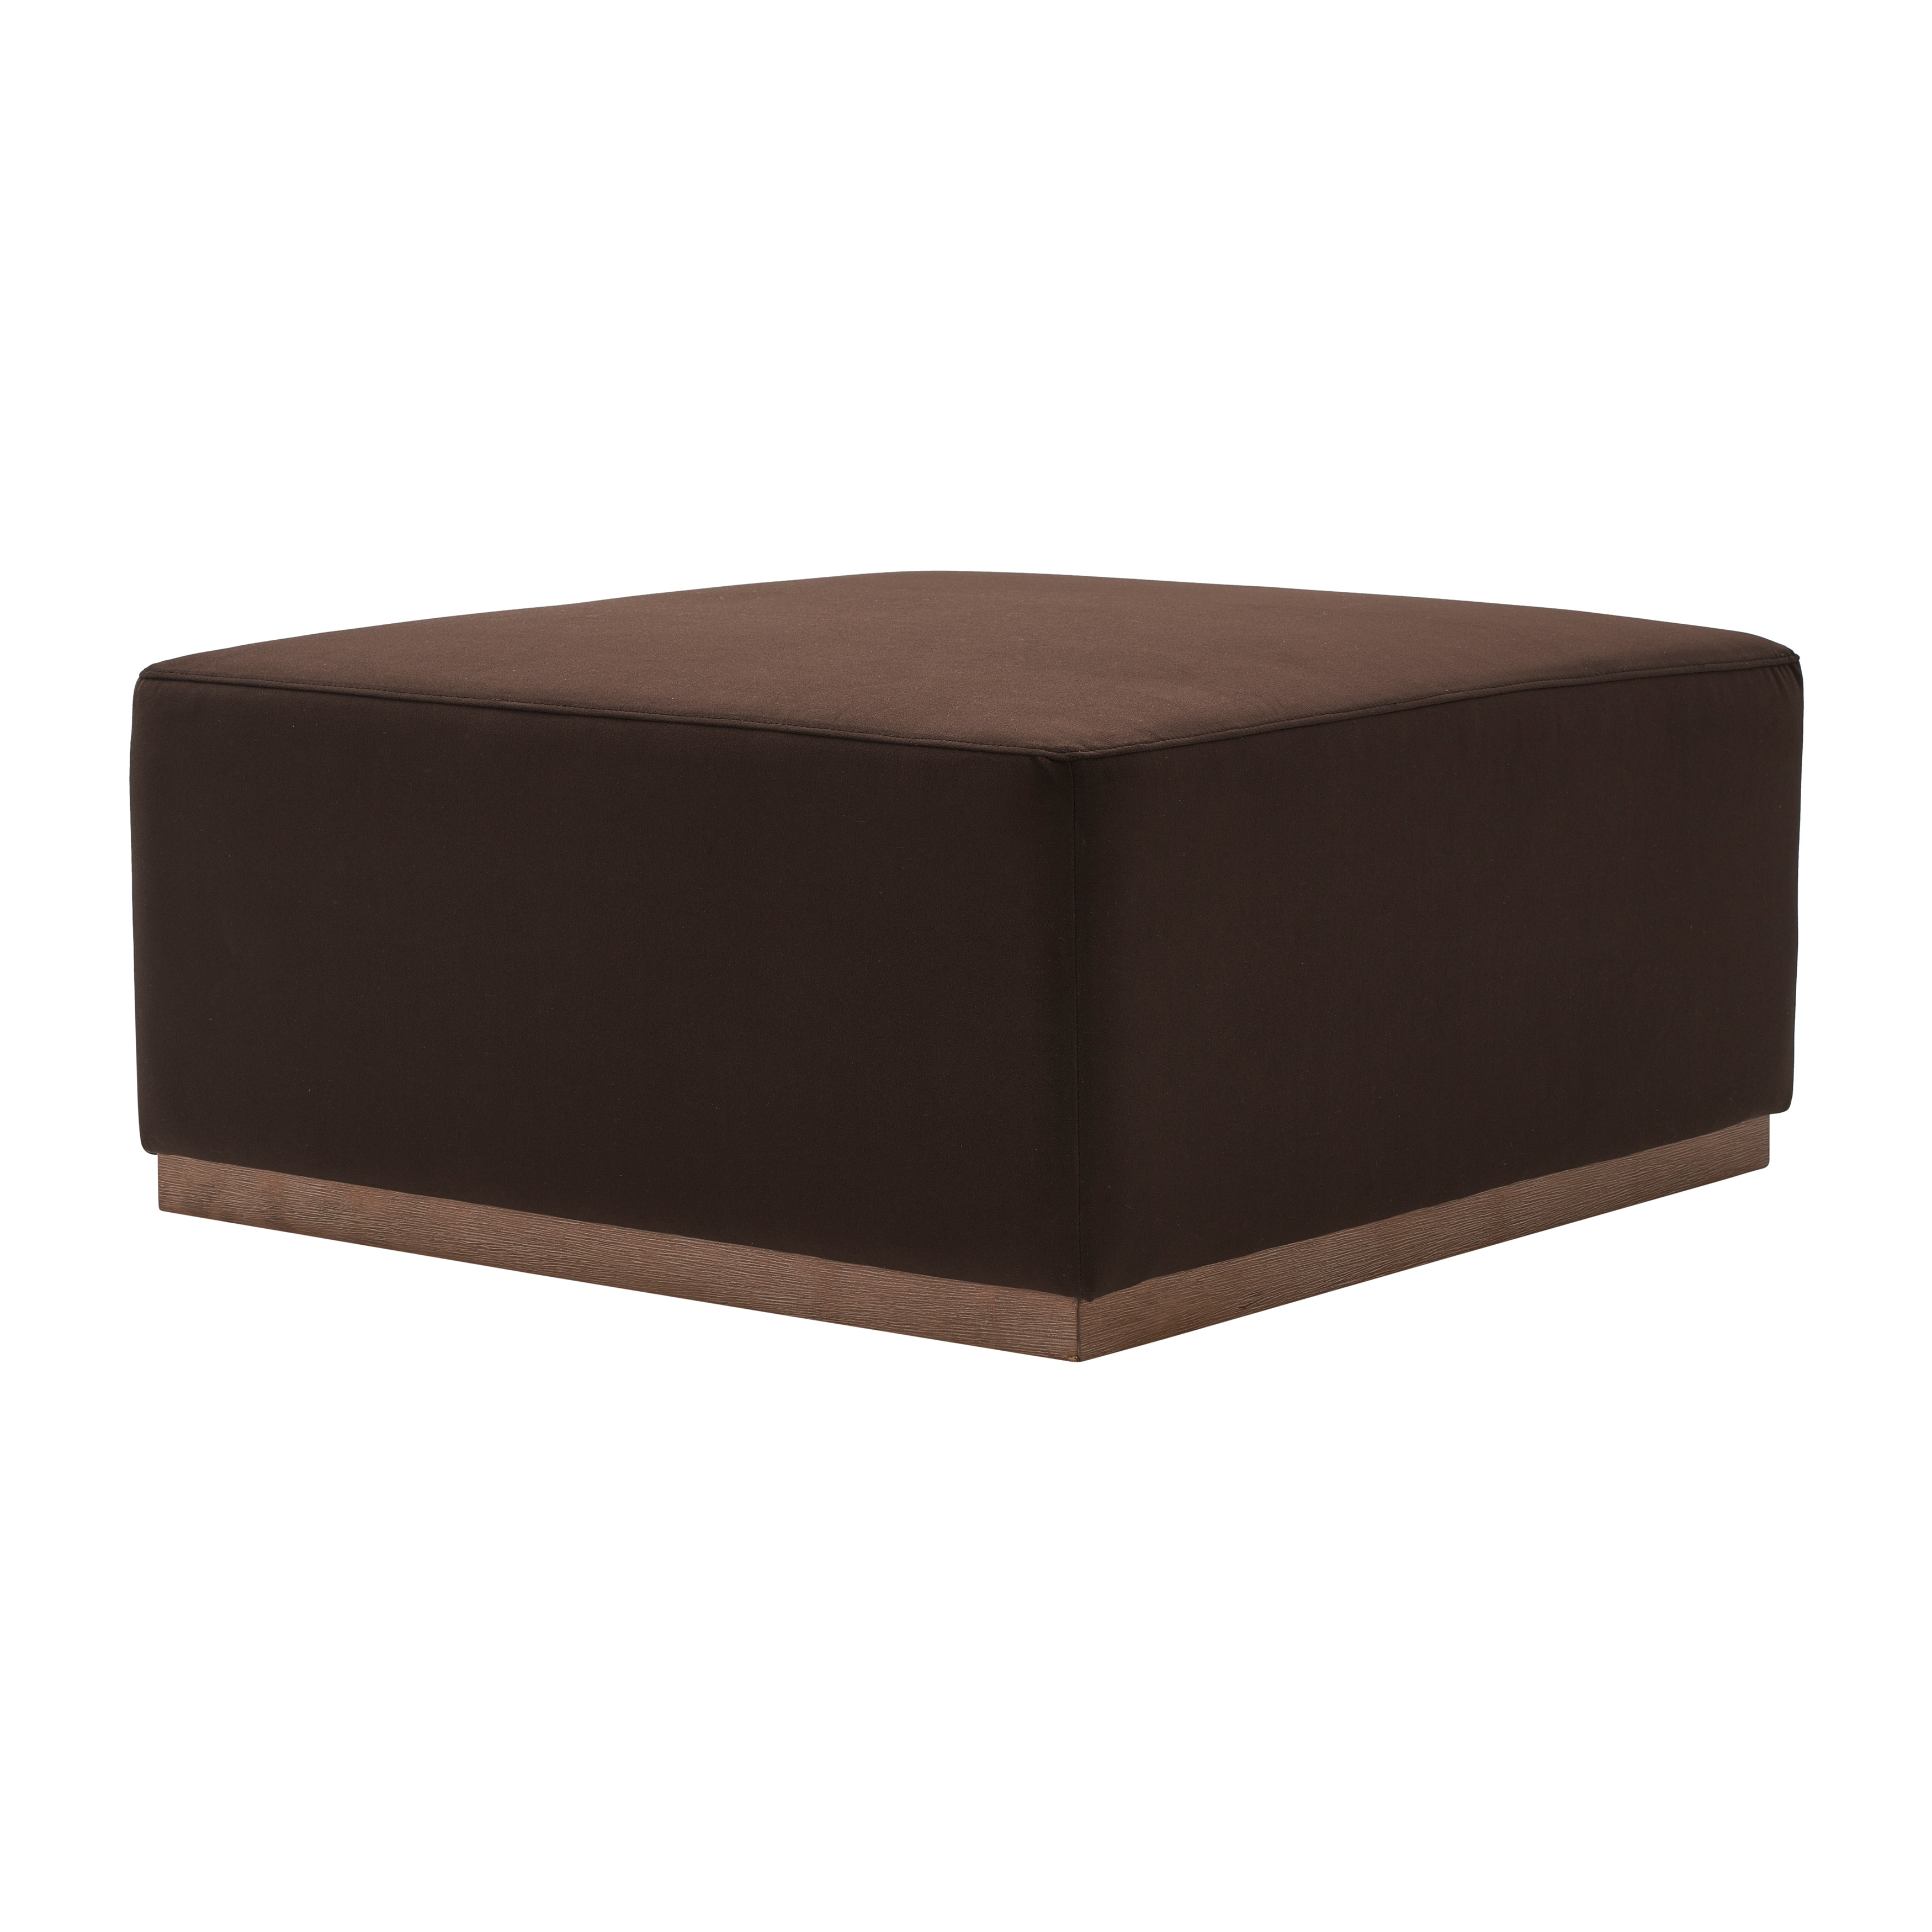 Sagebrook Home 40X18 Upholstered Square Ottoman, Brown, Square, 18"H, Solid Color